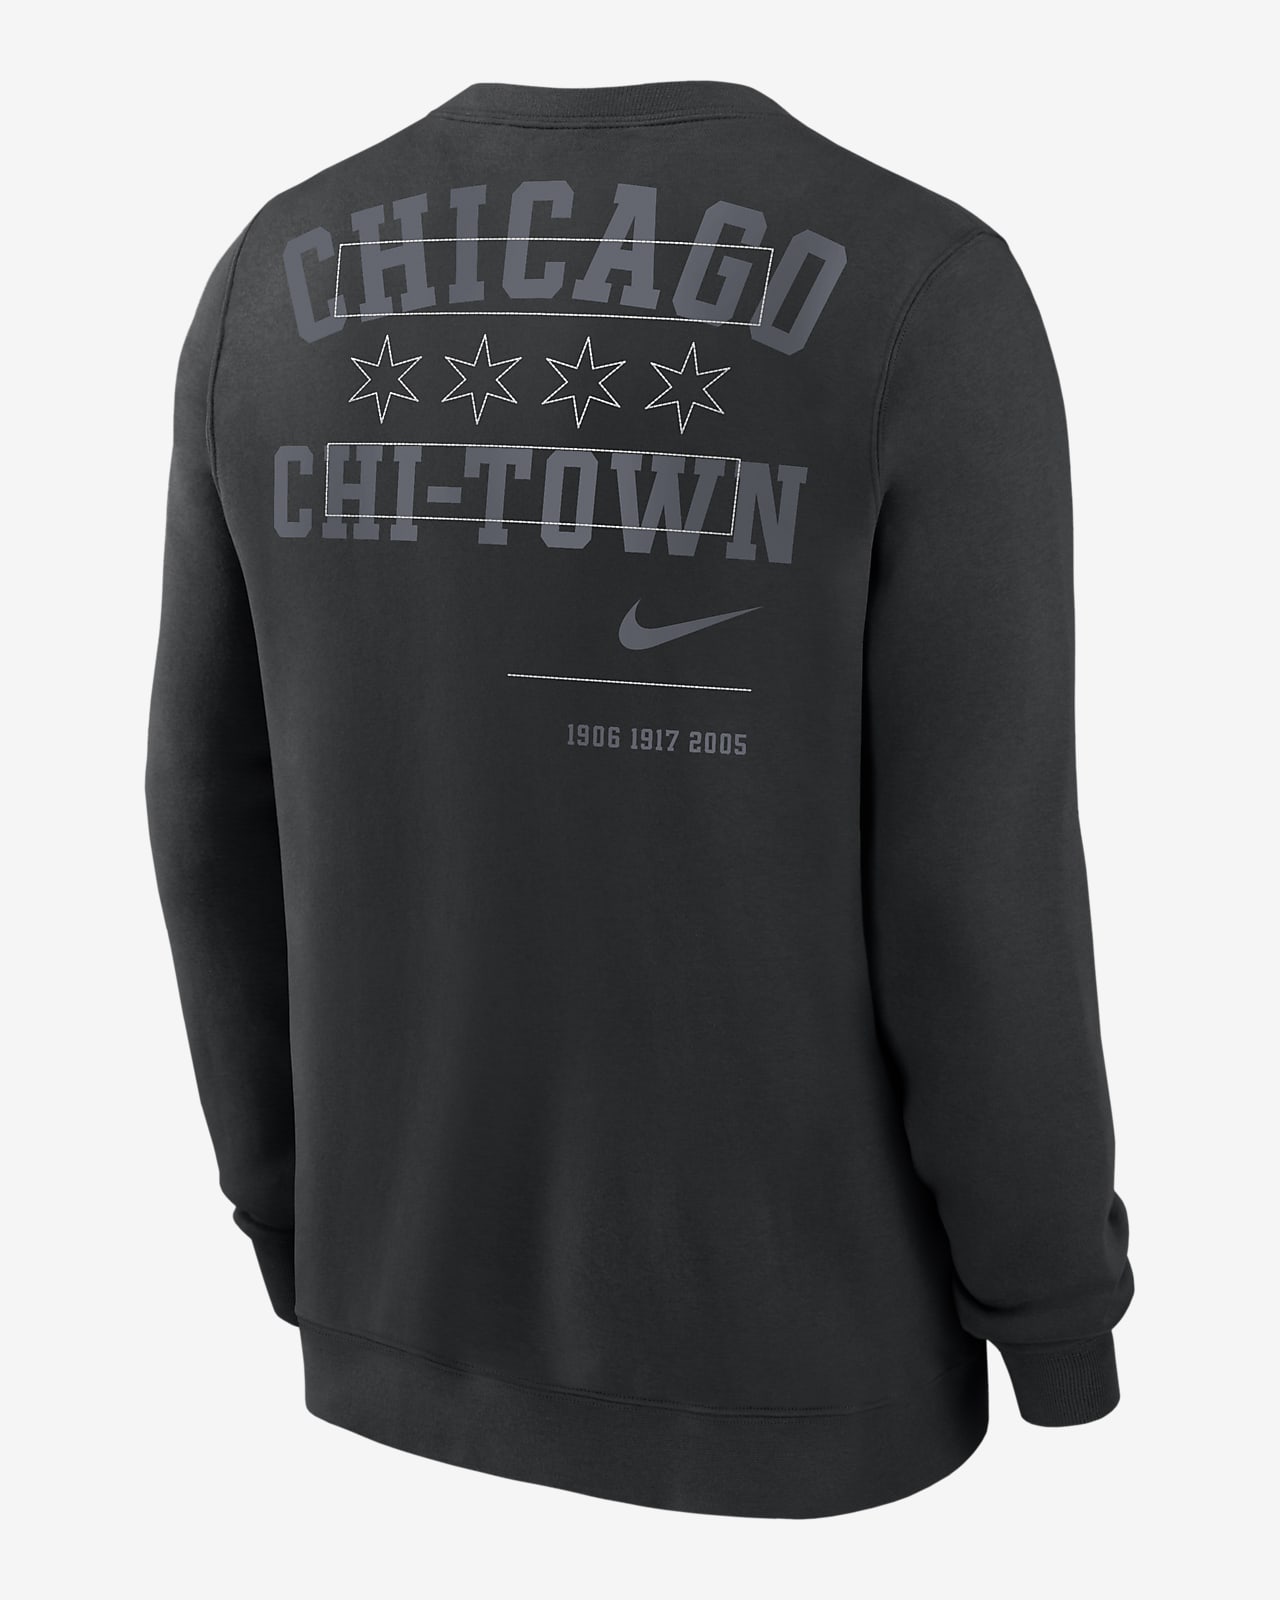 Chicago Basketball - Chitown Clothing XL